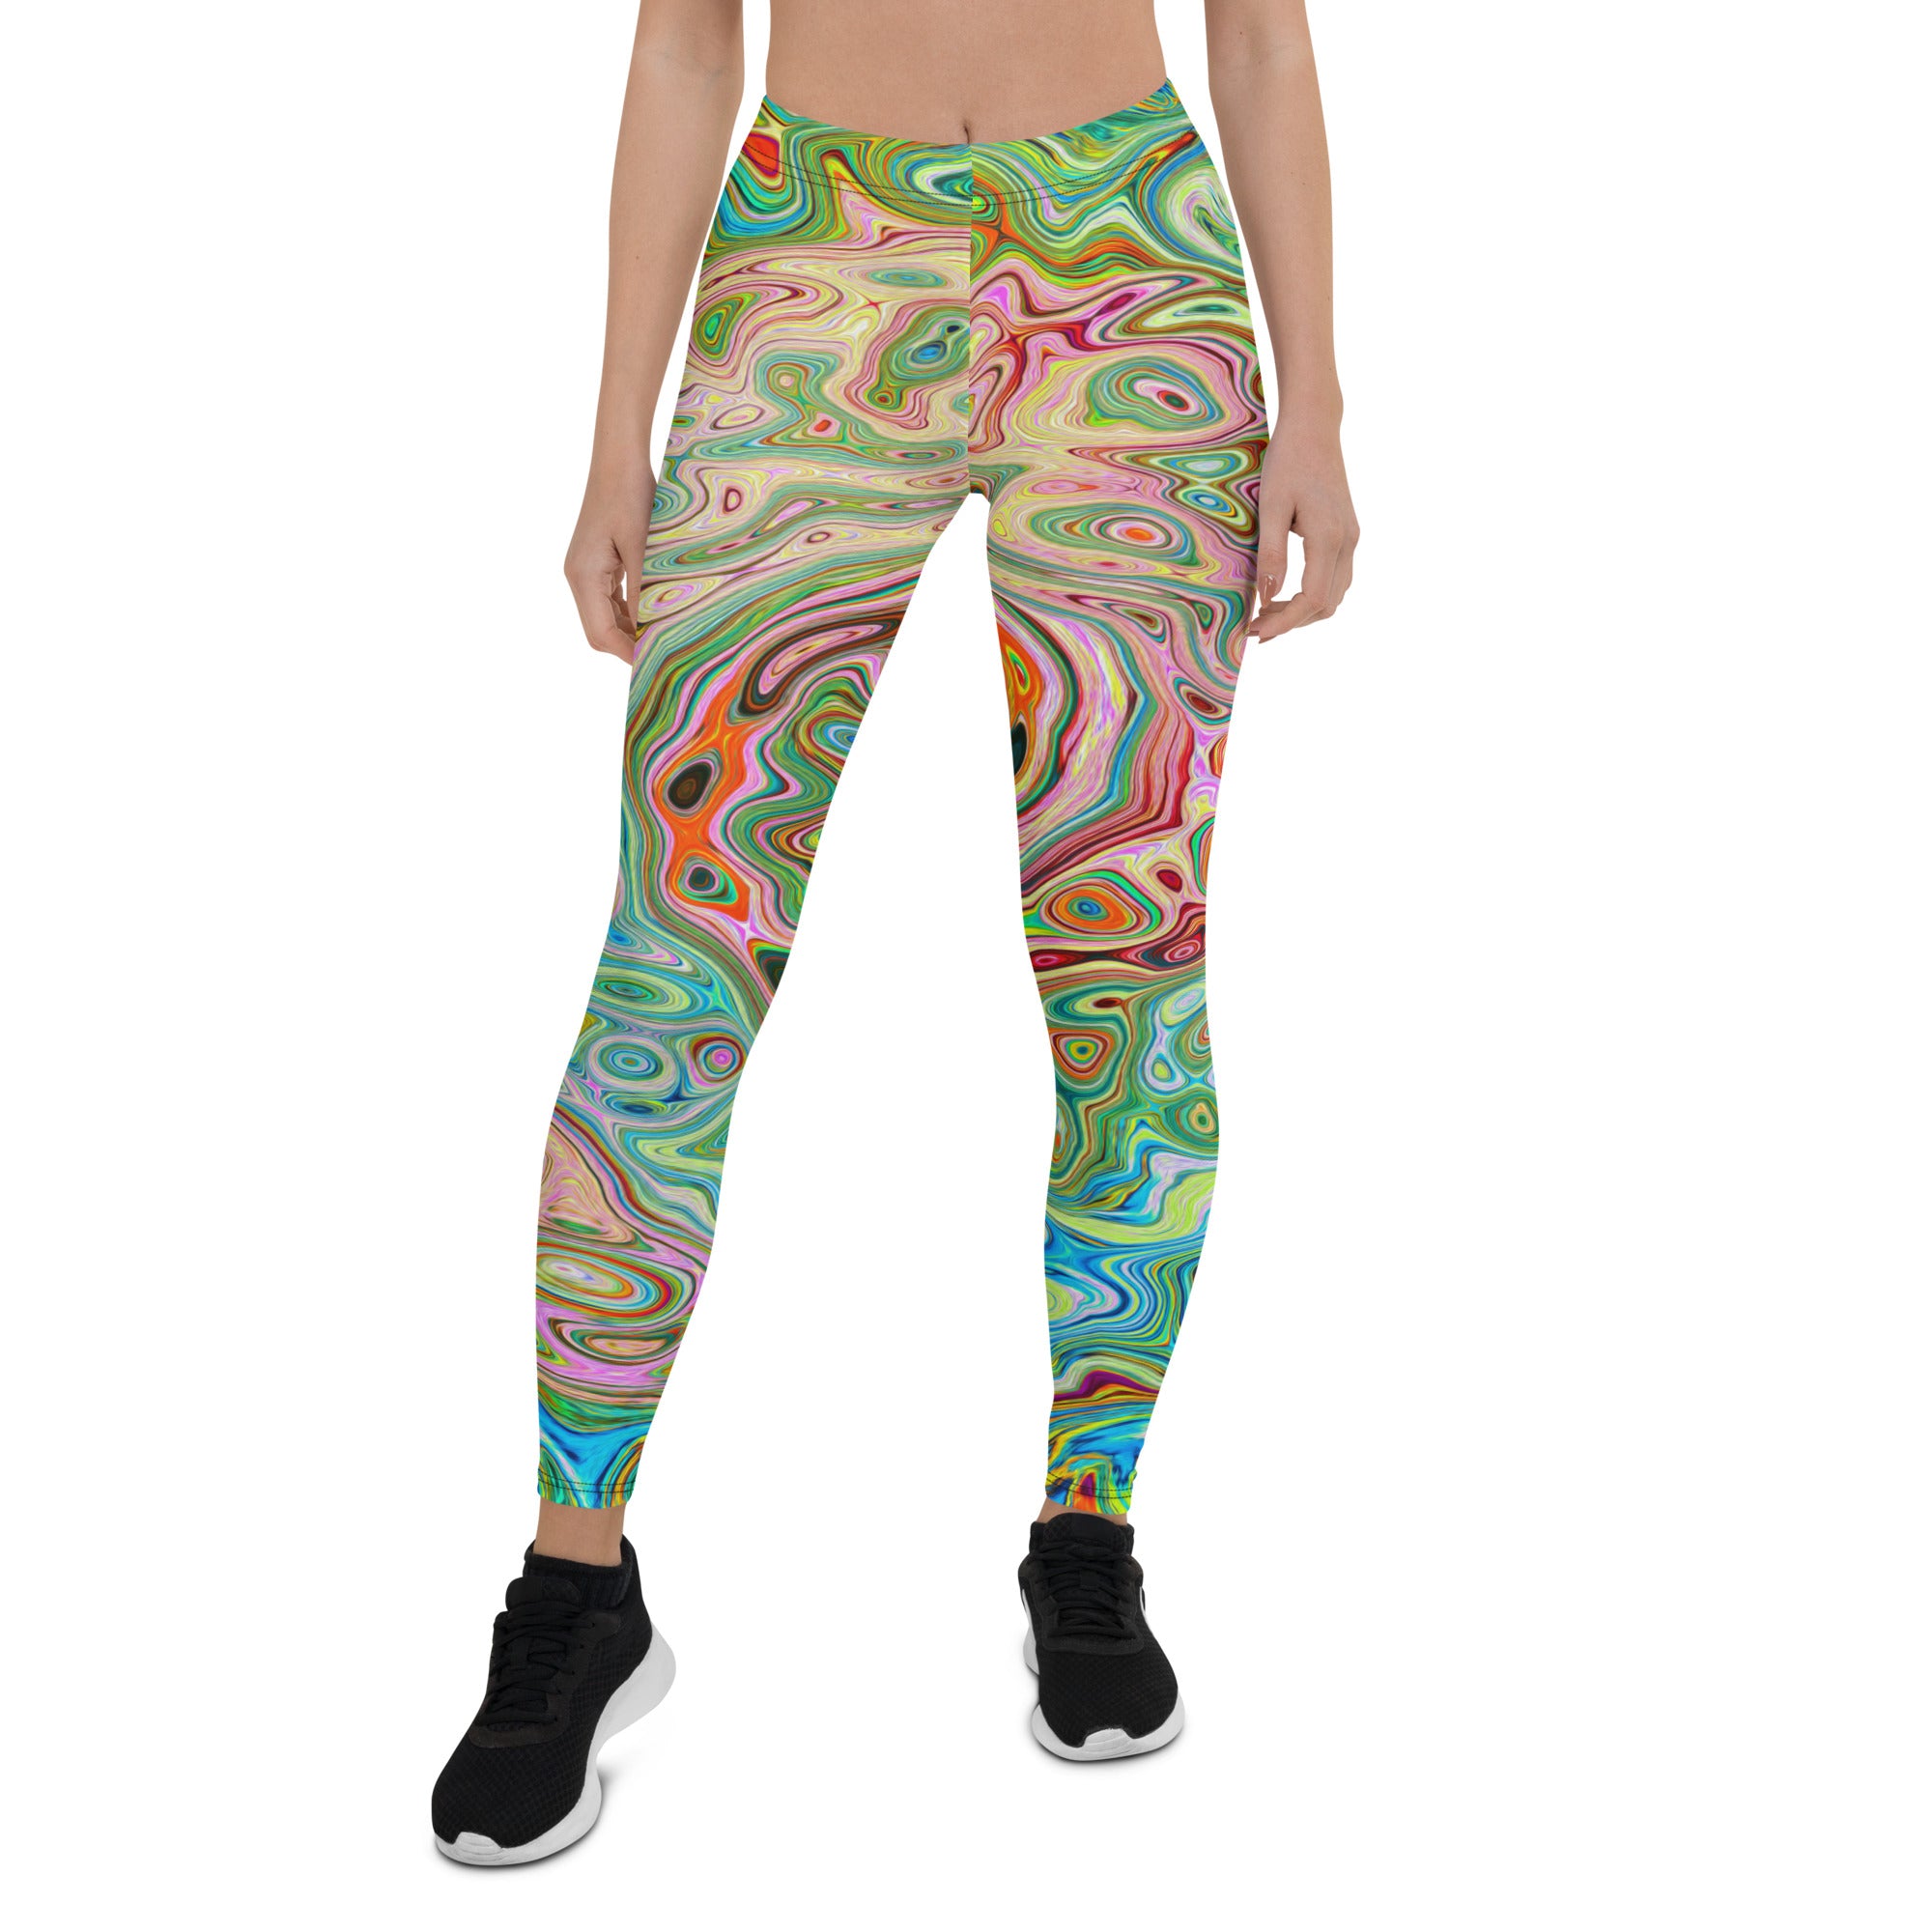 Leggings for Women - Retro Groovy Abstract Colorful Rainbow Swirl